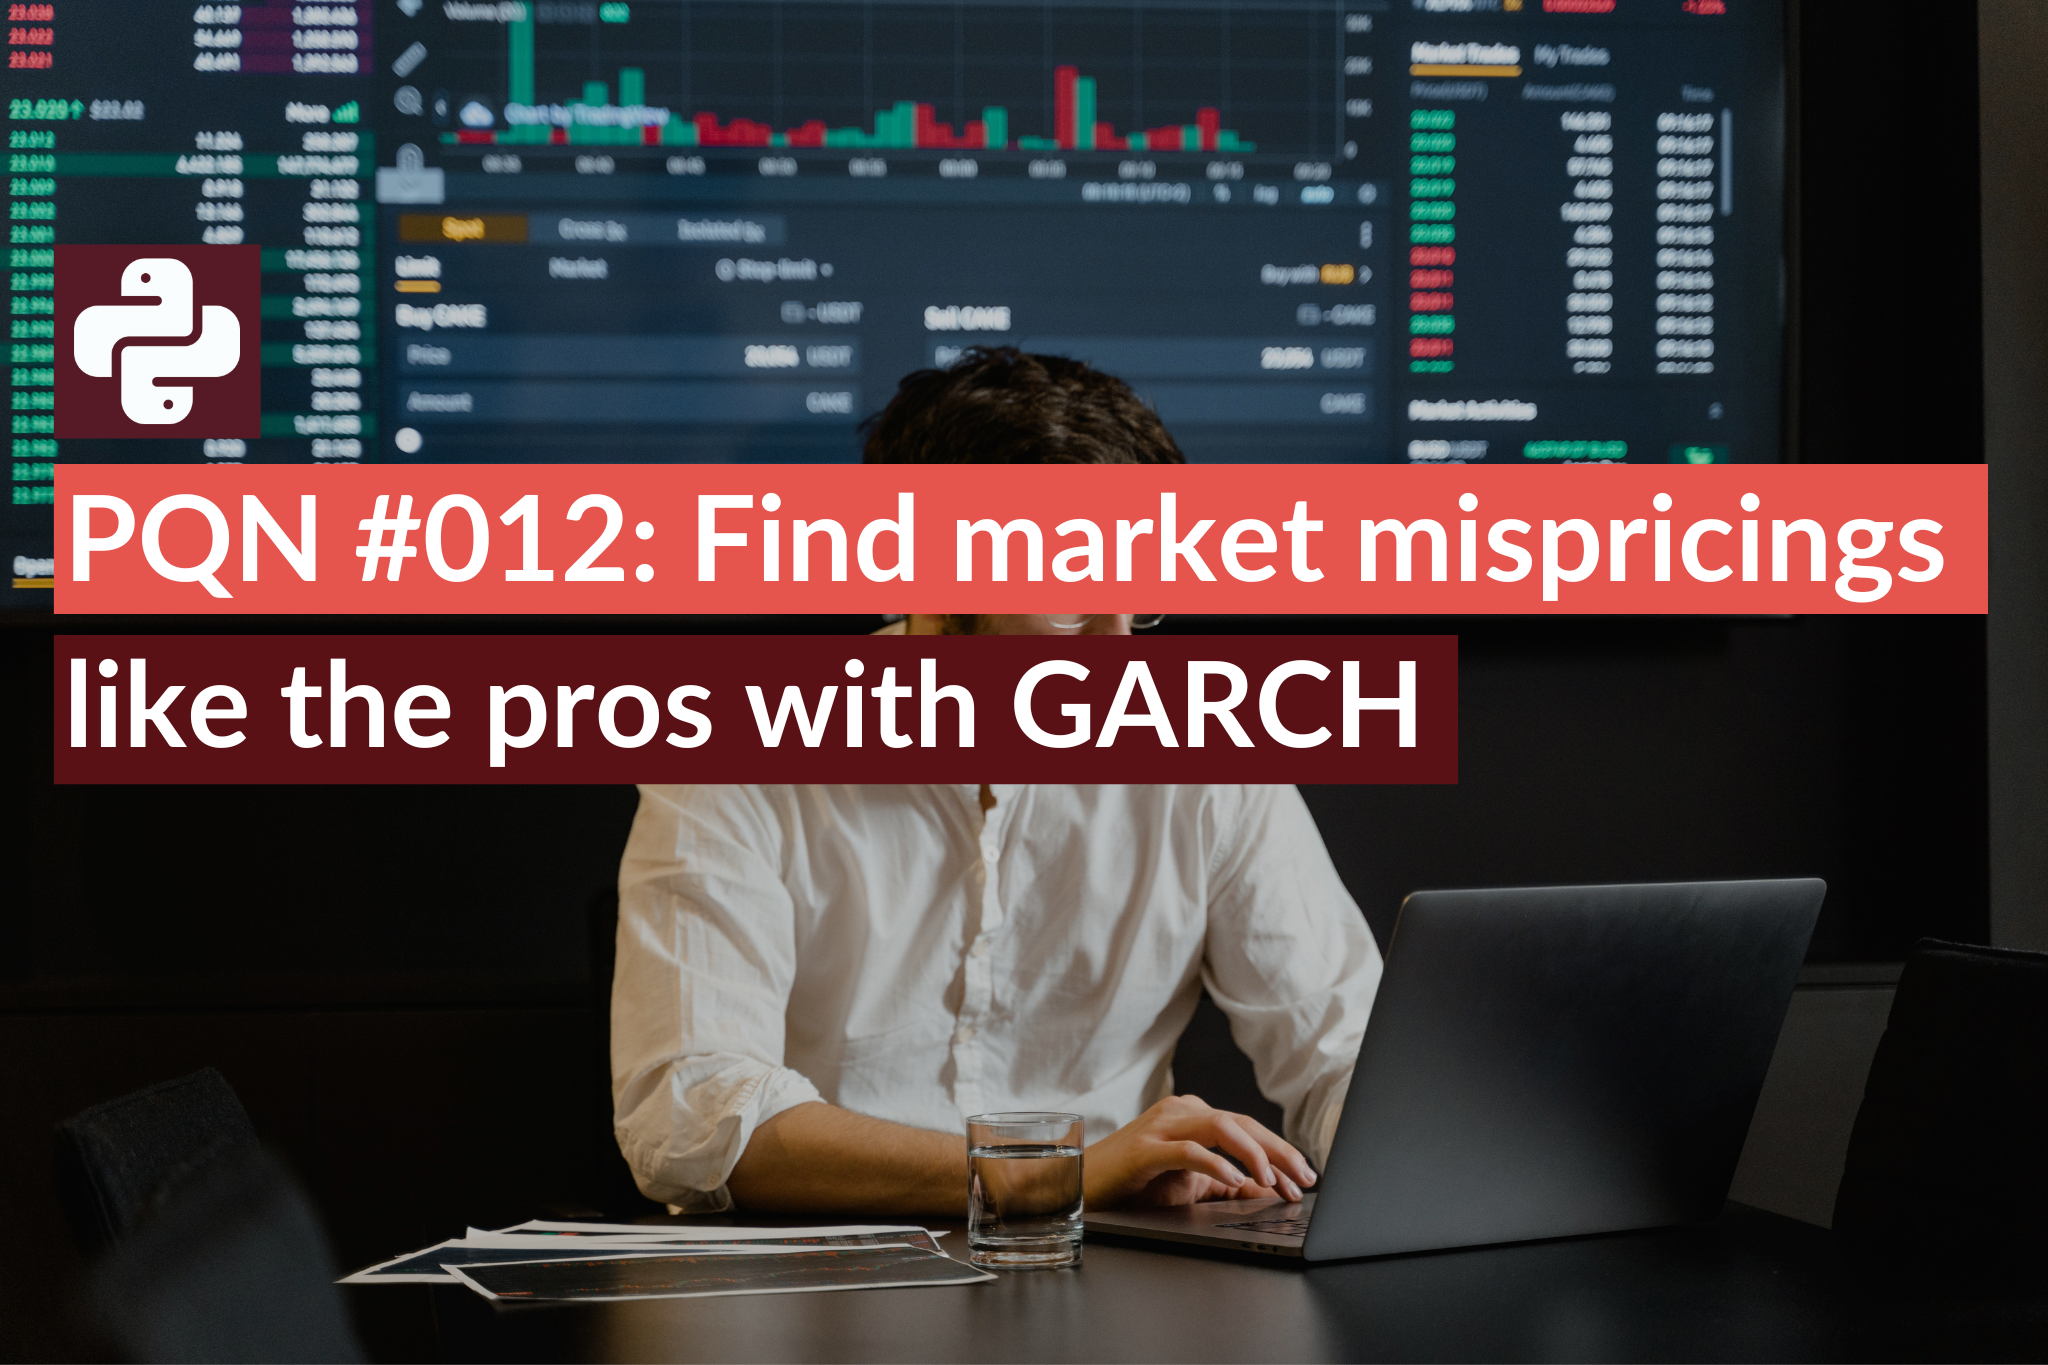 PQN #012 Find market mispricings like the pros with GARCH